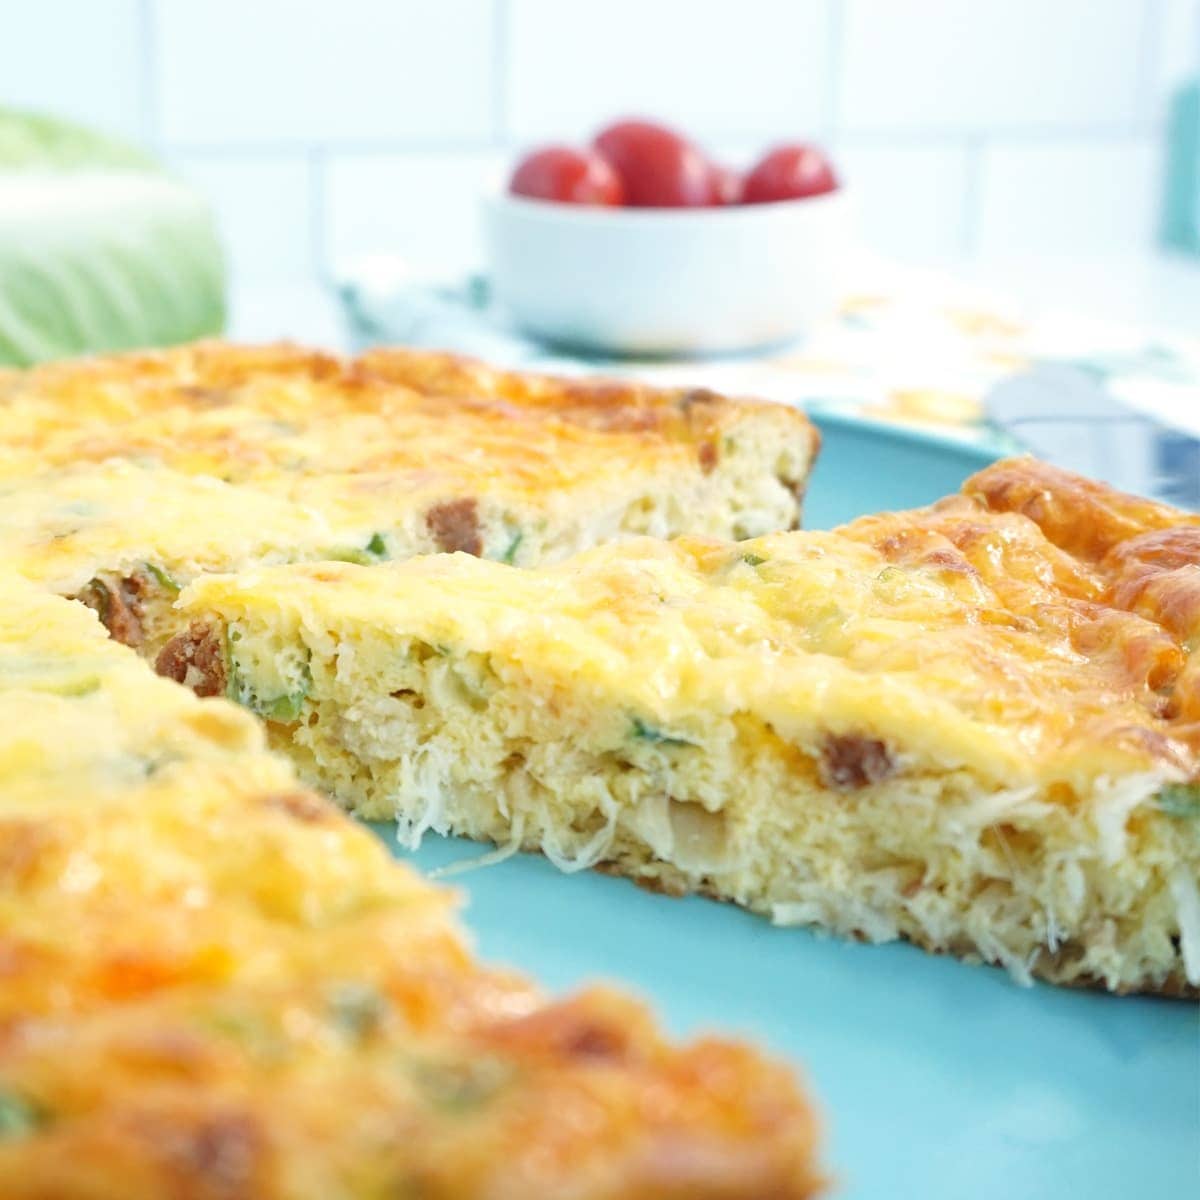 Close-up of a slice of quiche